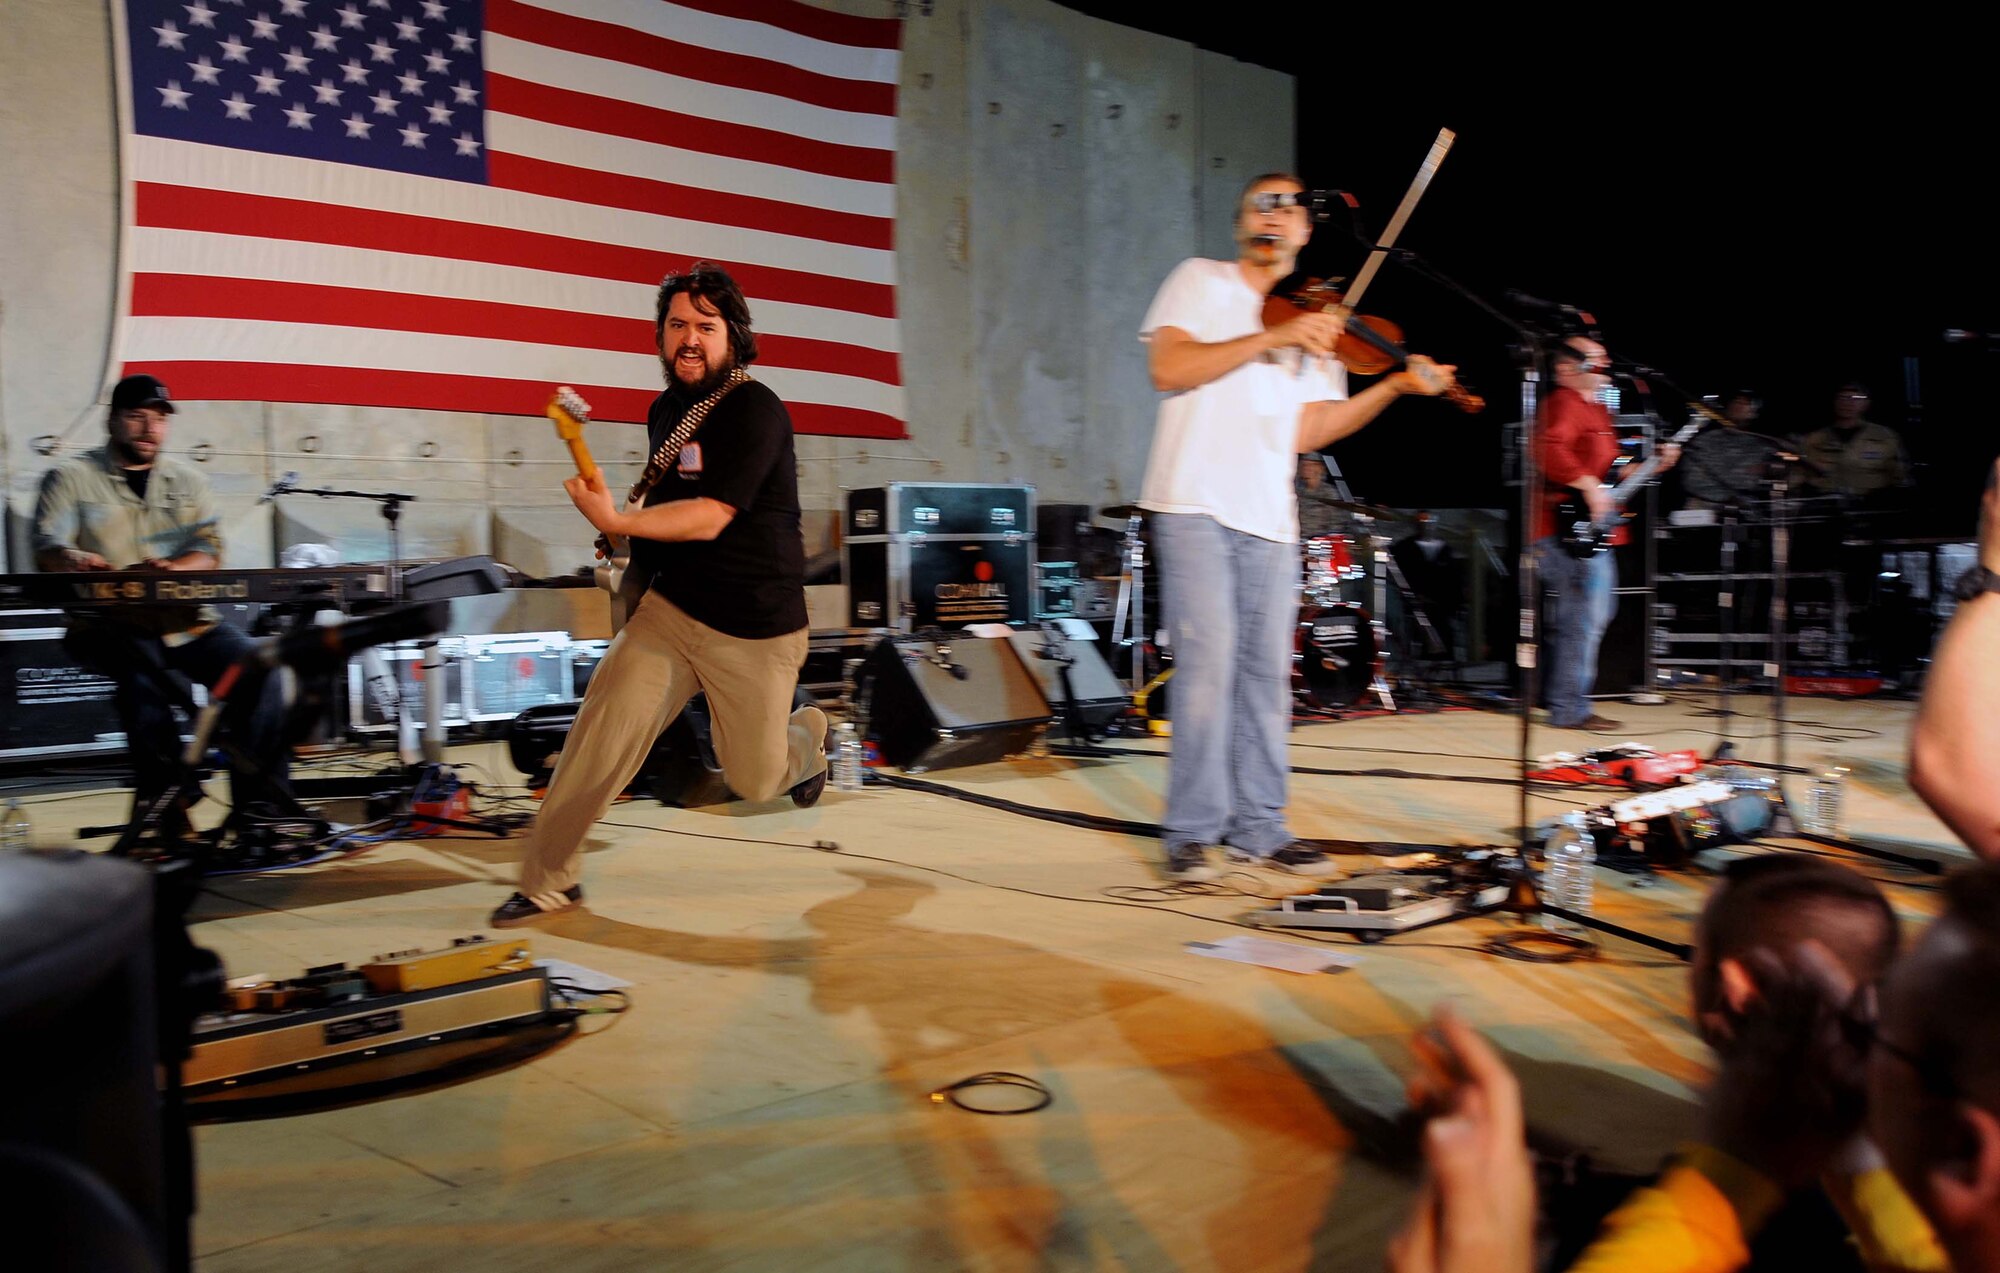 Clay Cook, a member of the Zac Brown band, runs across the stage during the performance of "Devil Went Down to Georgia" for a crowd of deployed personnel in Holt Stadium at Joint Base Balad, Iraq, April 18, 2010. The Grammy nominated band is touring various bases throughout Southwest Asia to perform for the troops rather than attend this year's Academy of Country Music Awards for which they were nominated. (U.S. Air Force photo by Master Sgt. Linda C. Miller/Released)